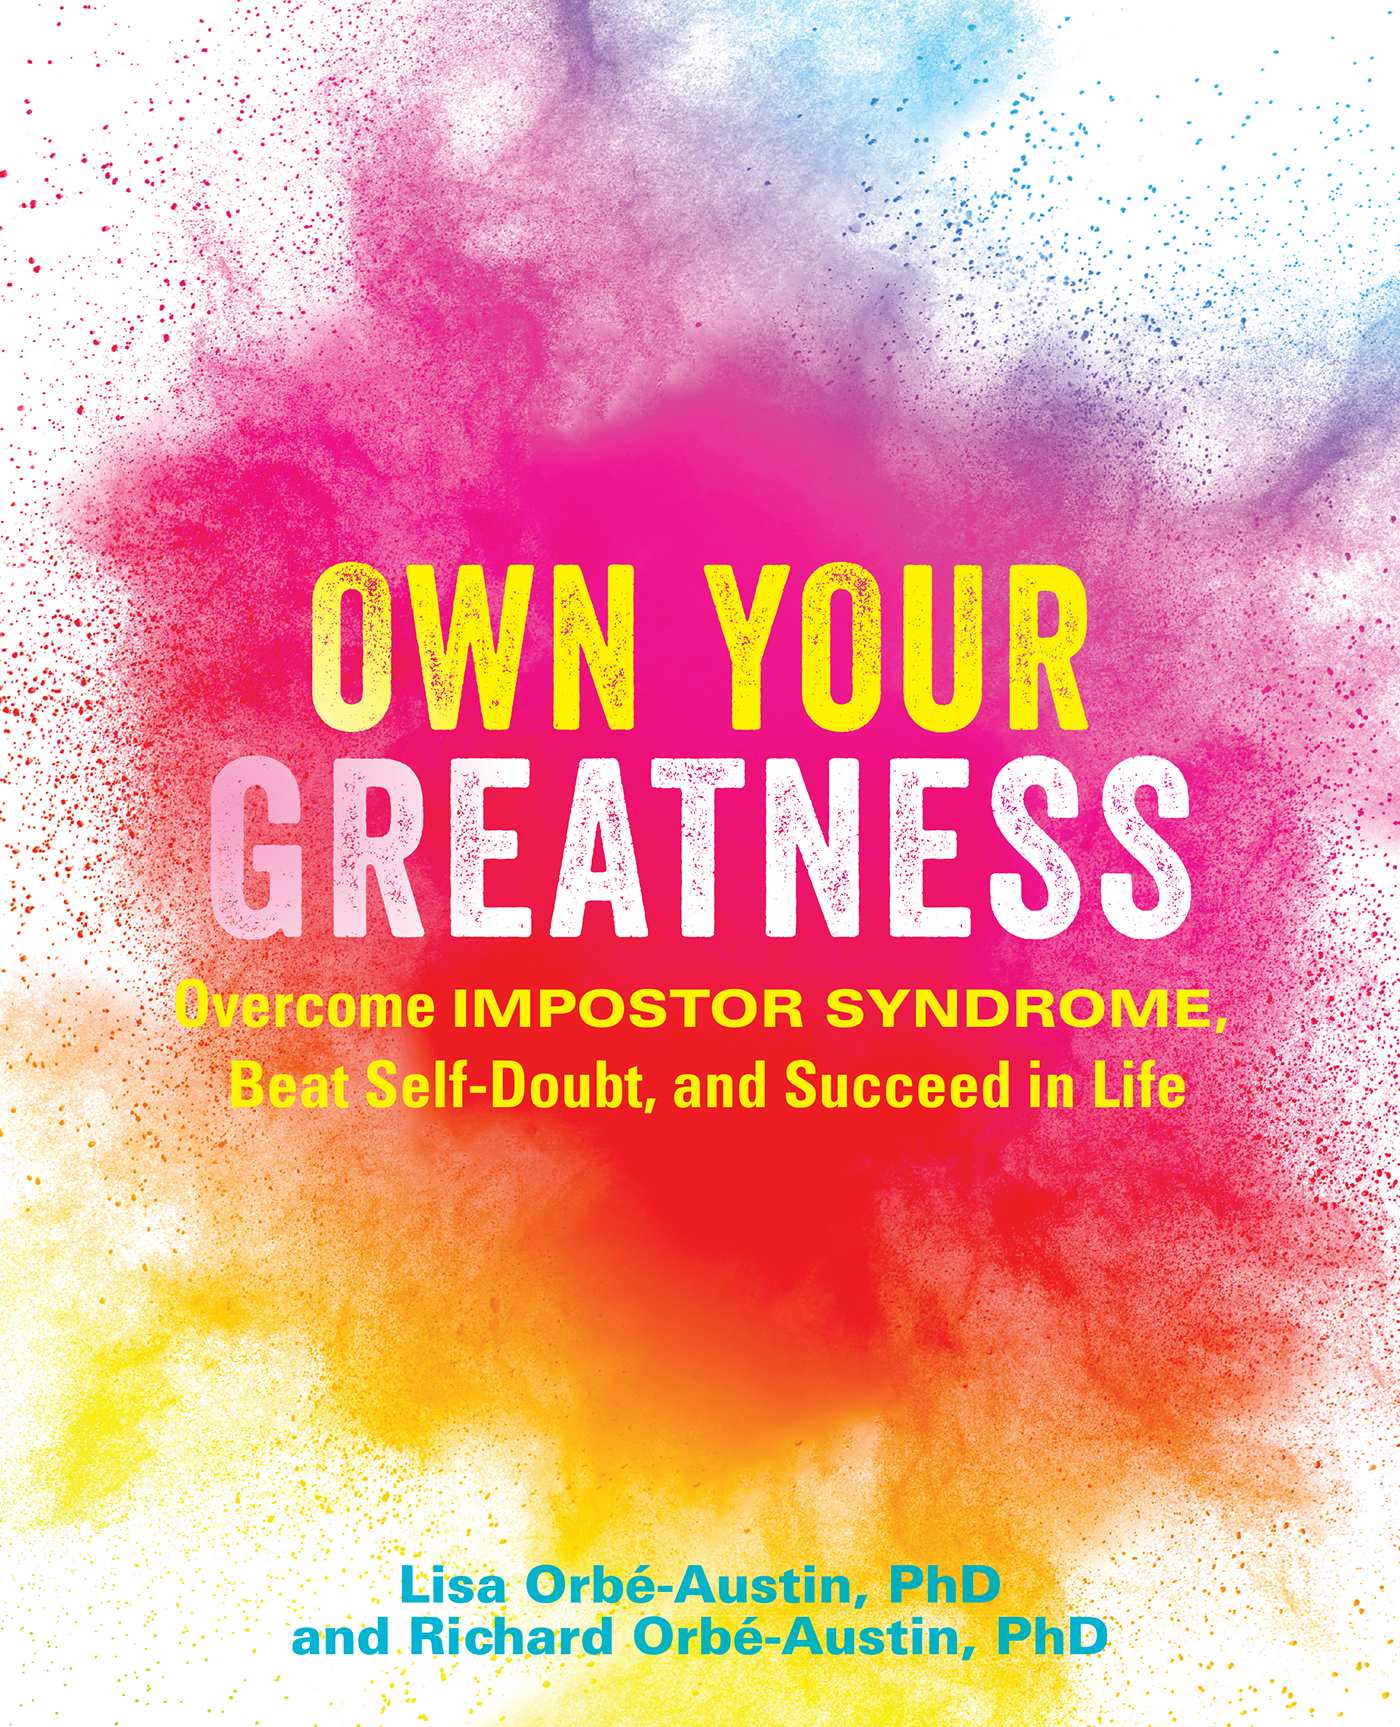 Impostor Syndrome Book